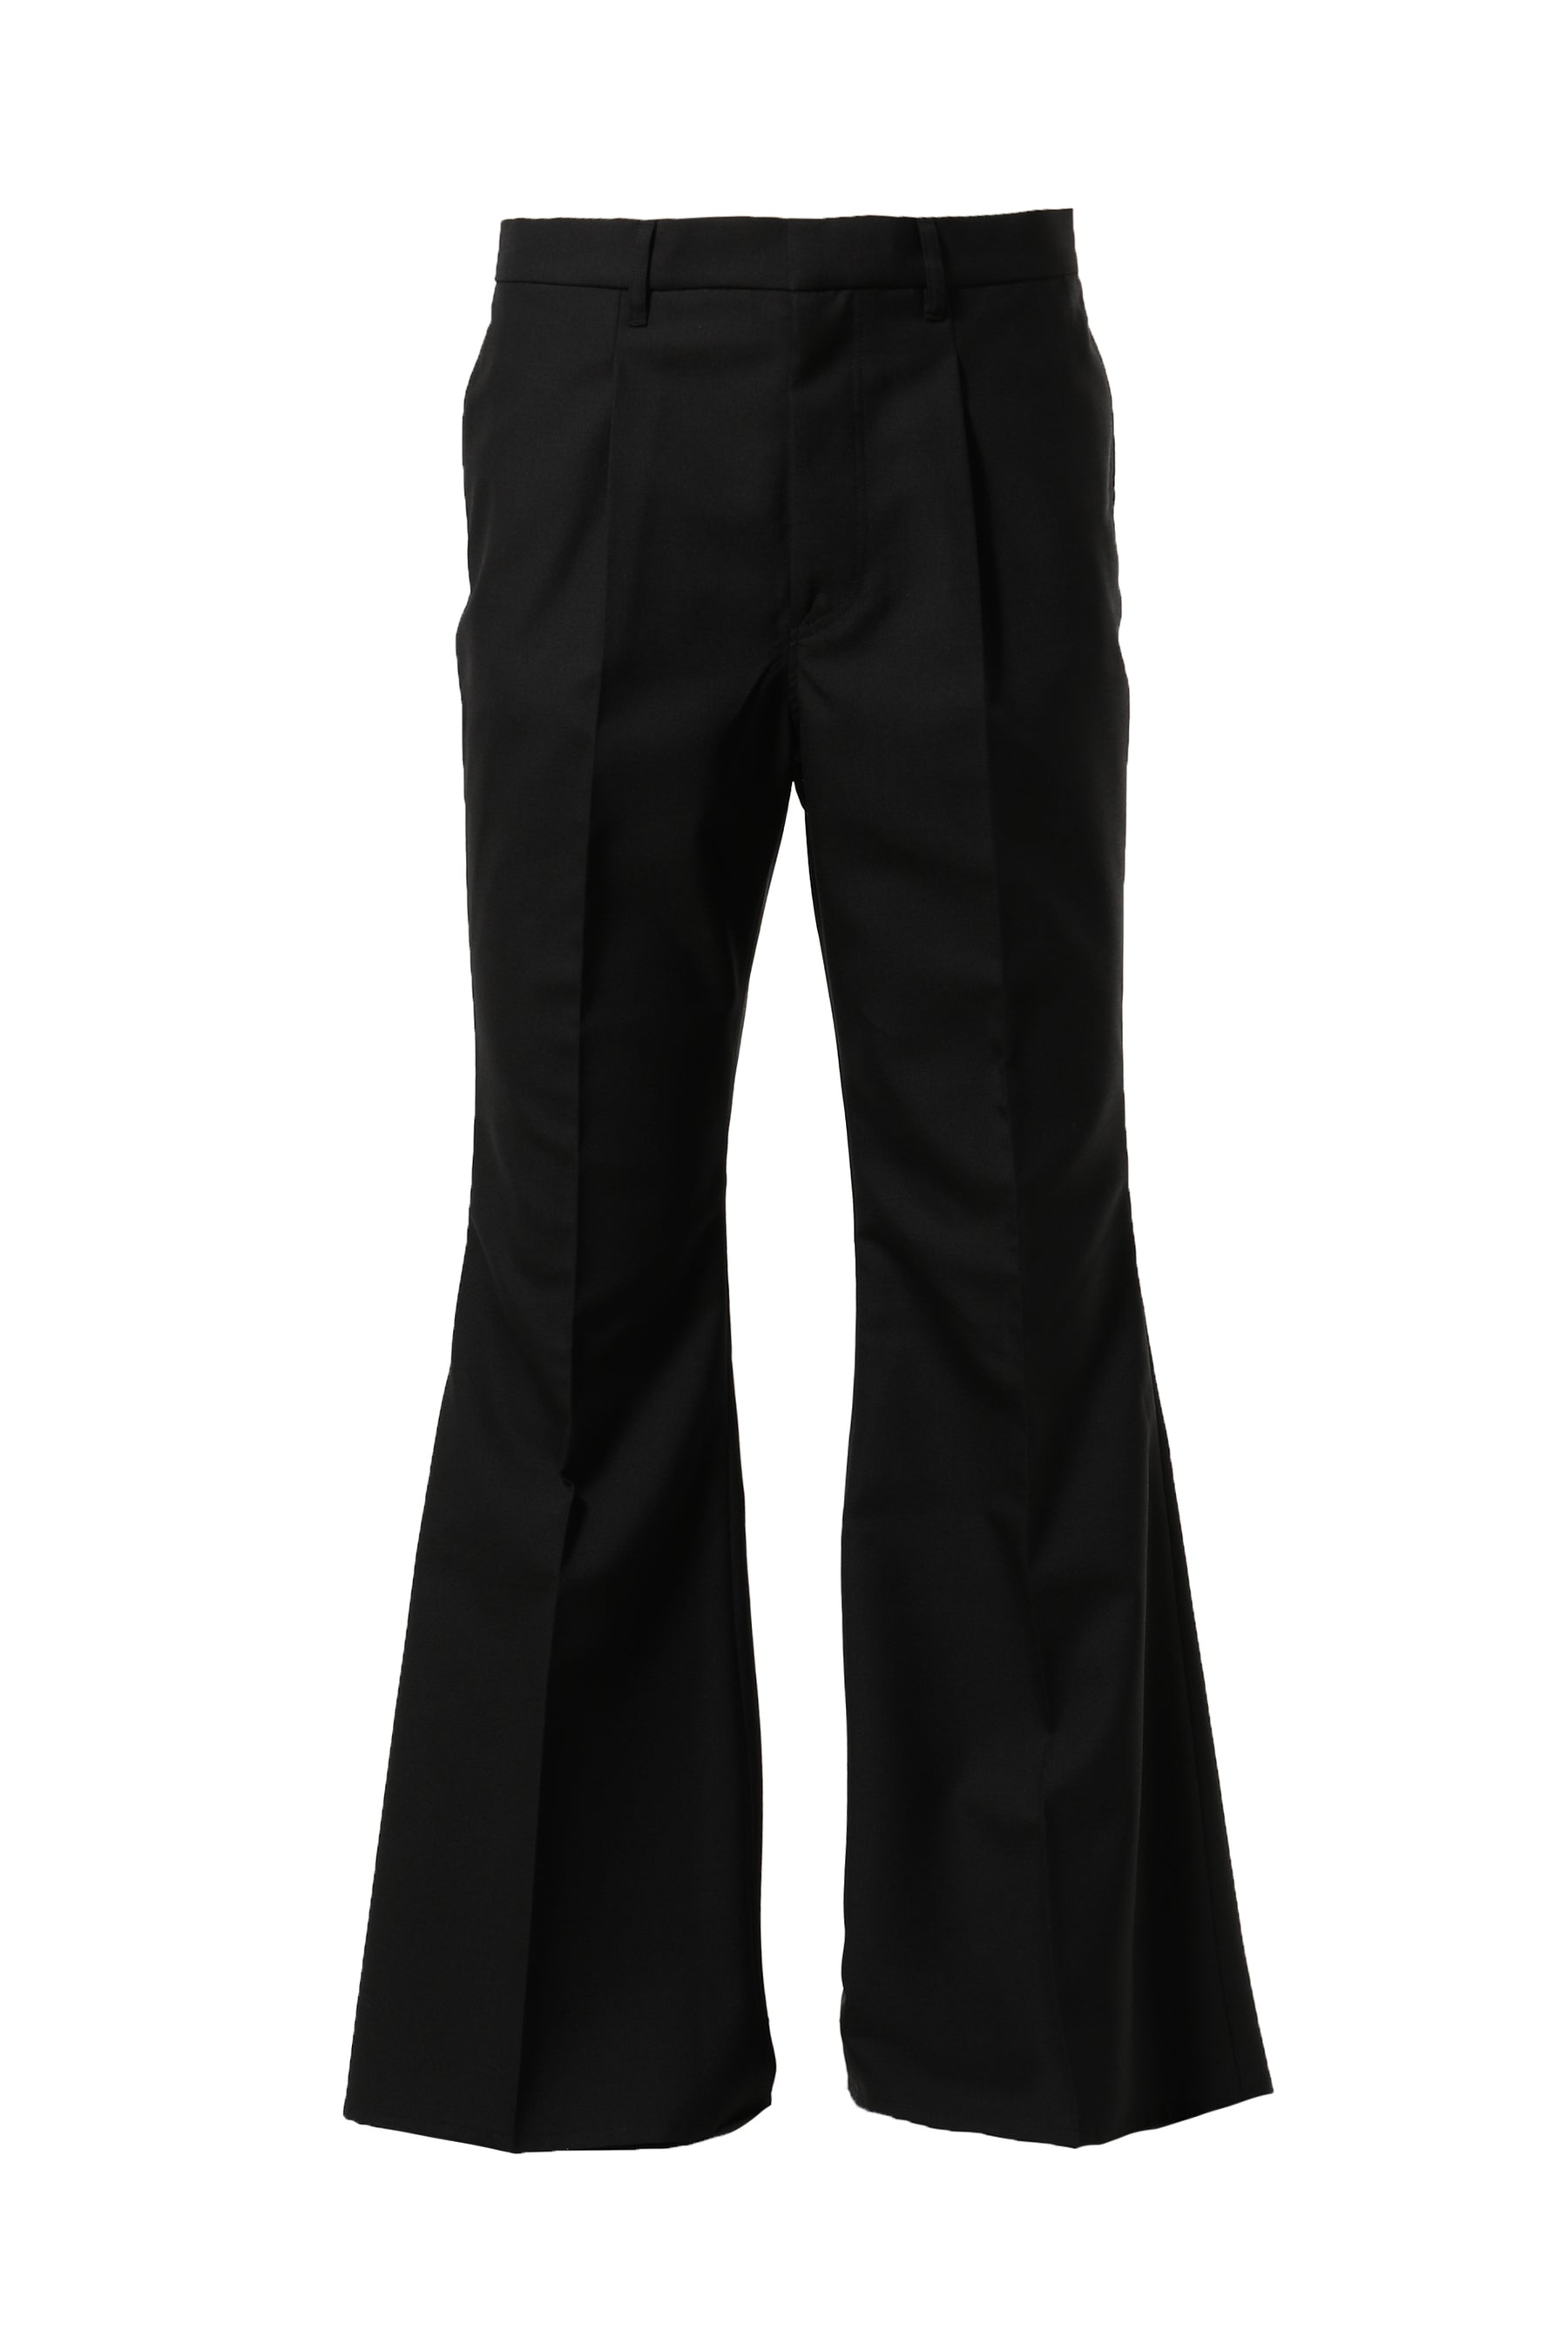 BED J.W. FORD ベッドフォード FW23 BELL BOTTOMS / BLK -NUBIAN